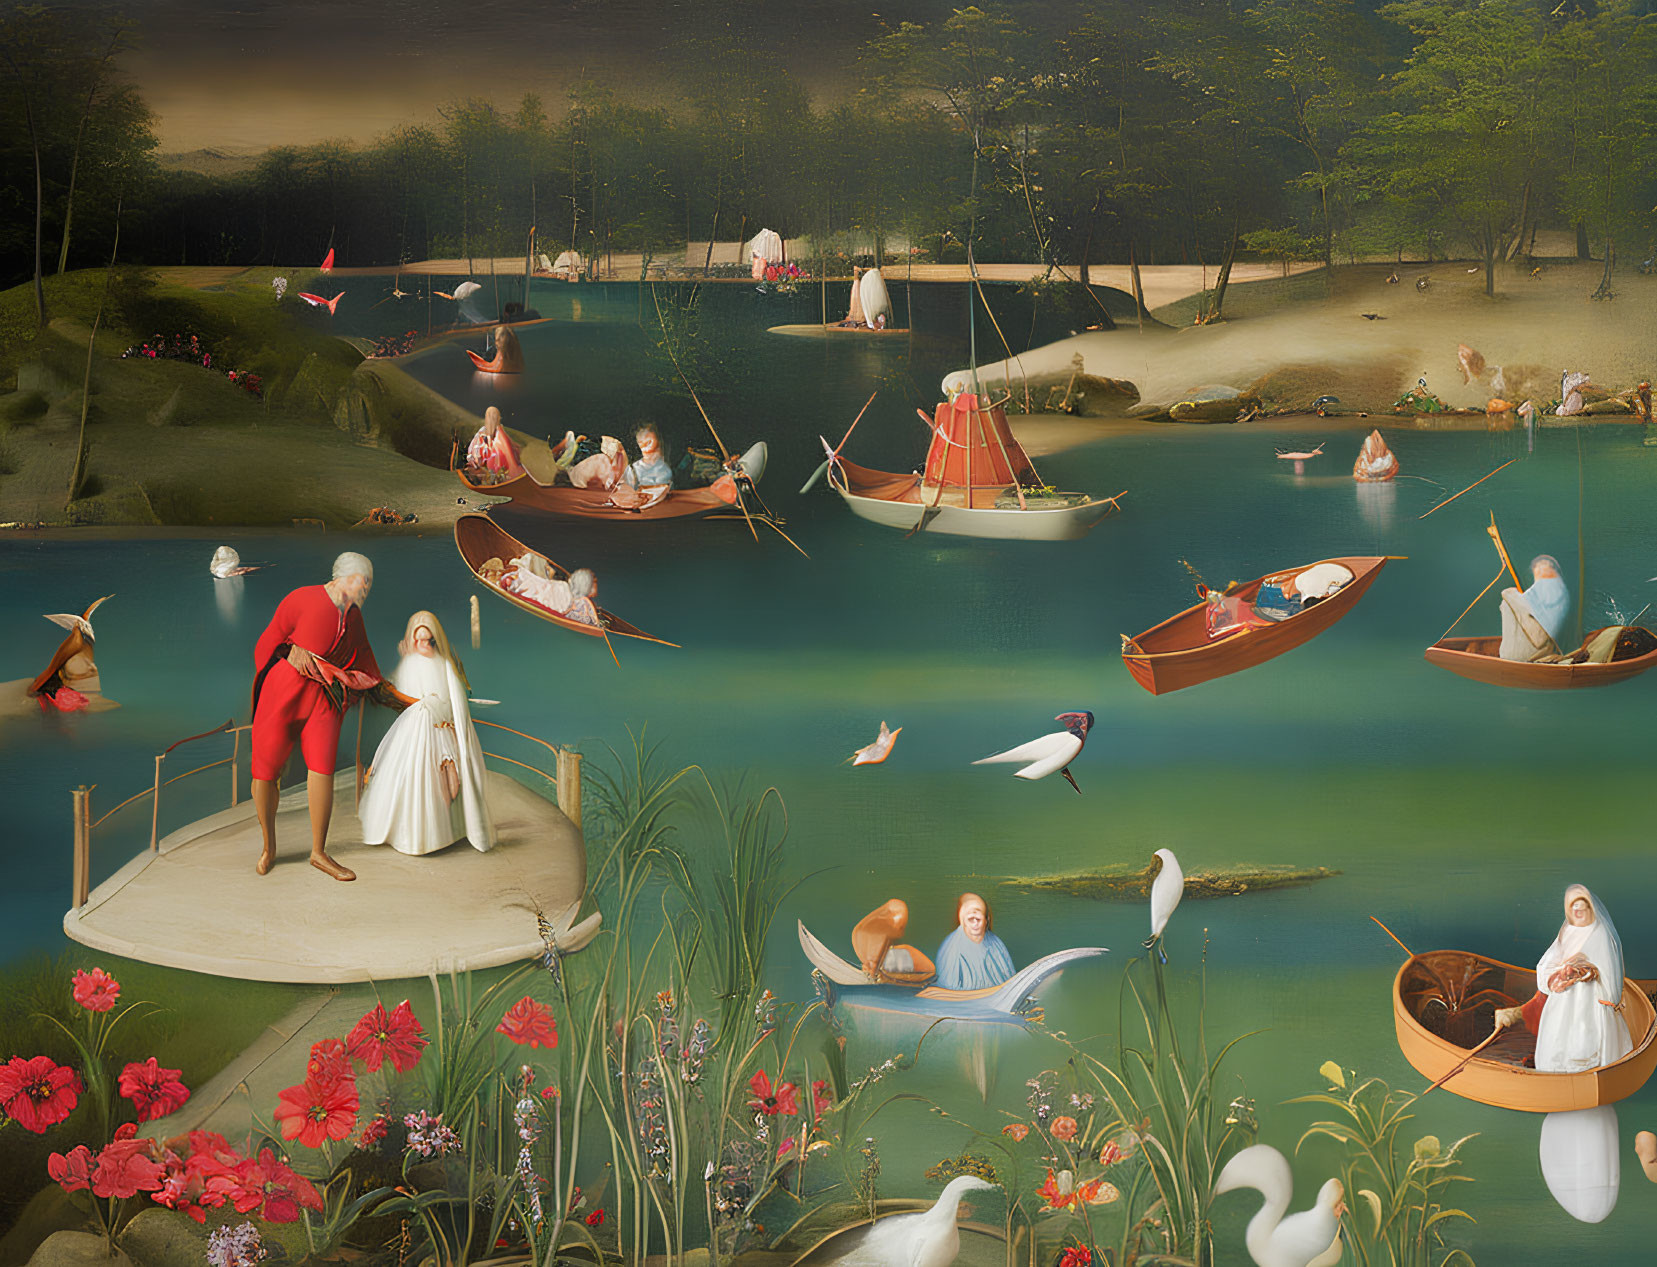 Surrealistic landscape with figures in boats, vibrant flowers, birds, and dreamlike atmosphere